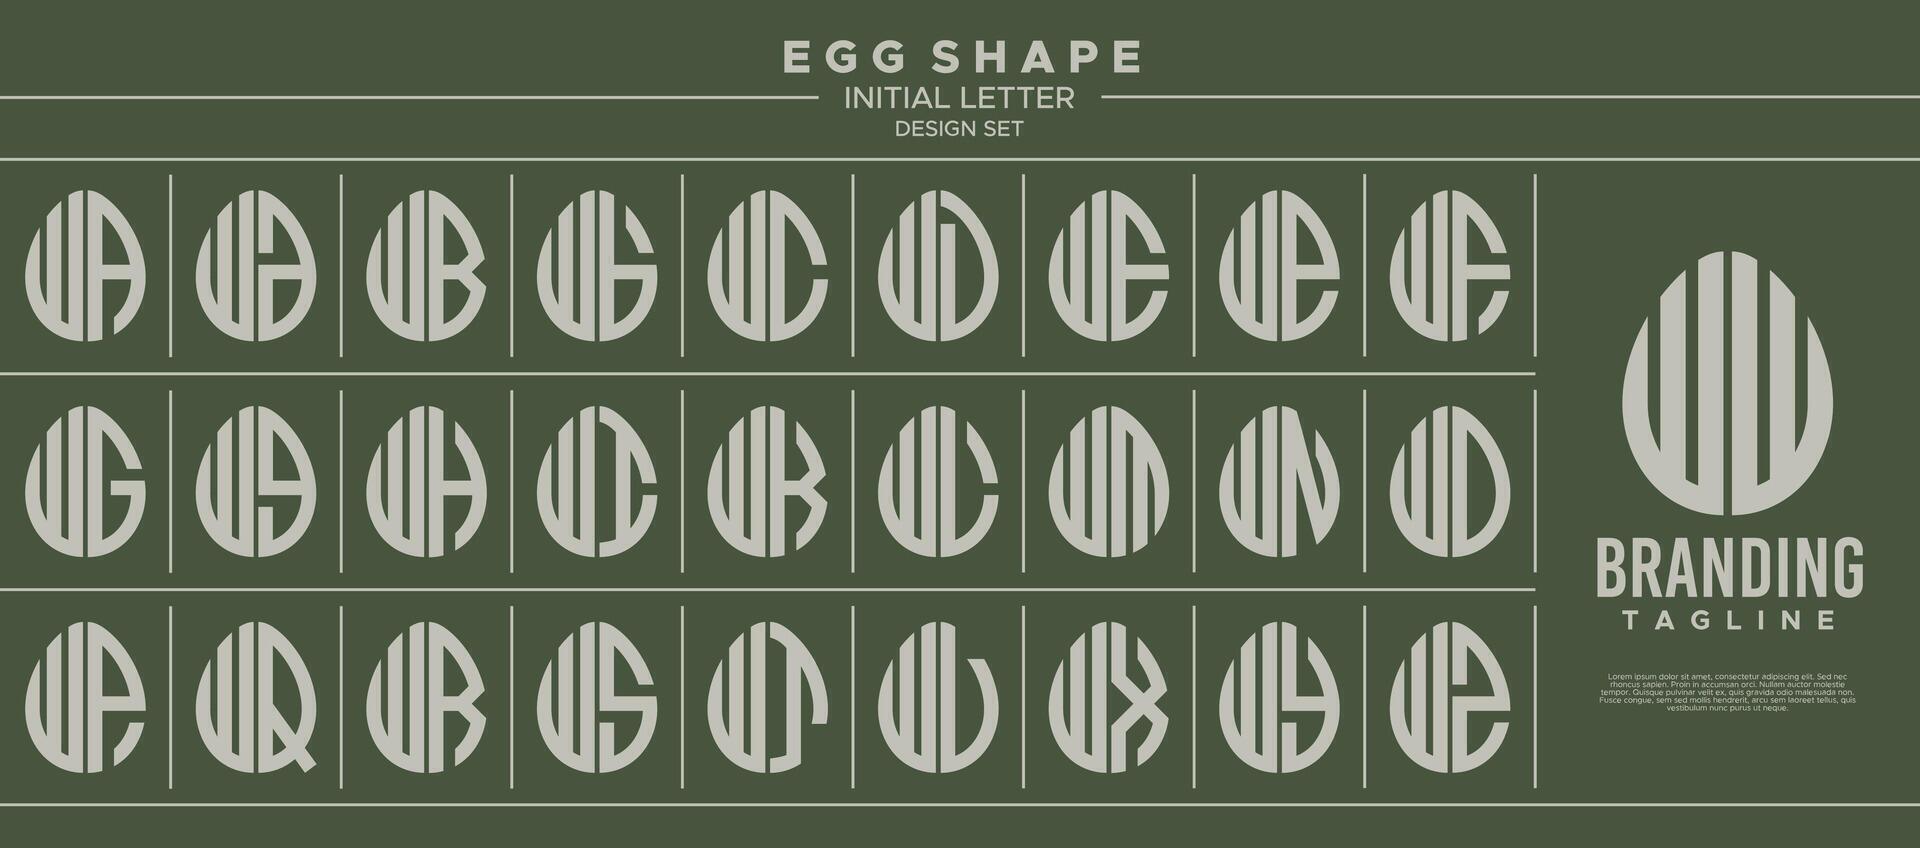 Collection of food egg shape initial letter W WW logo design vector